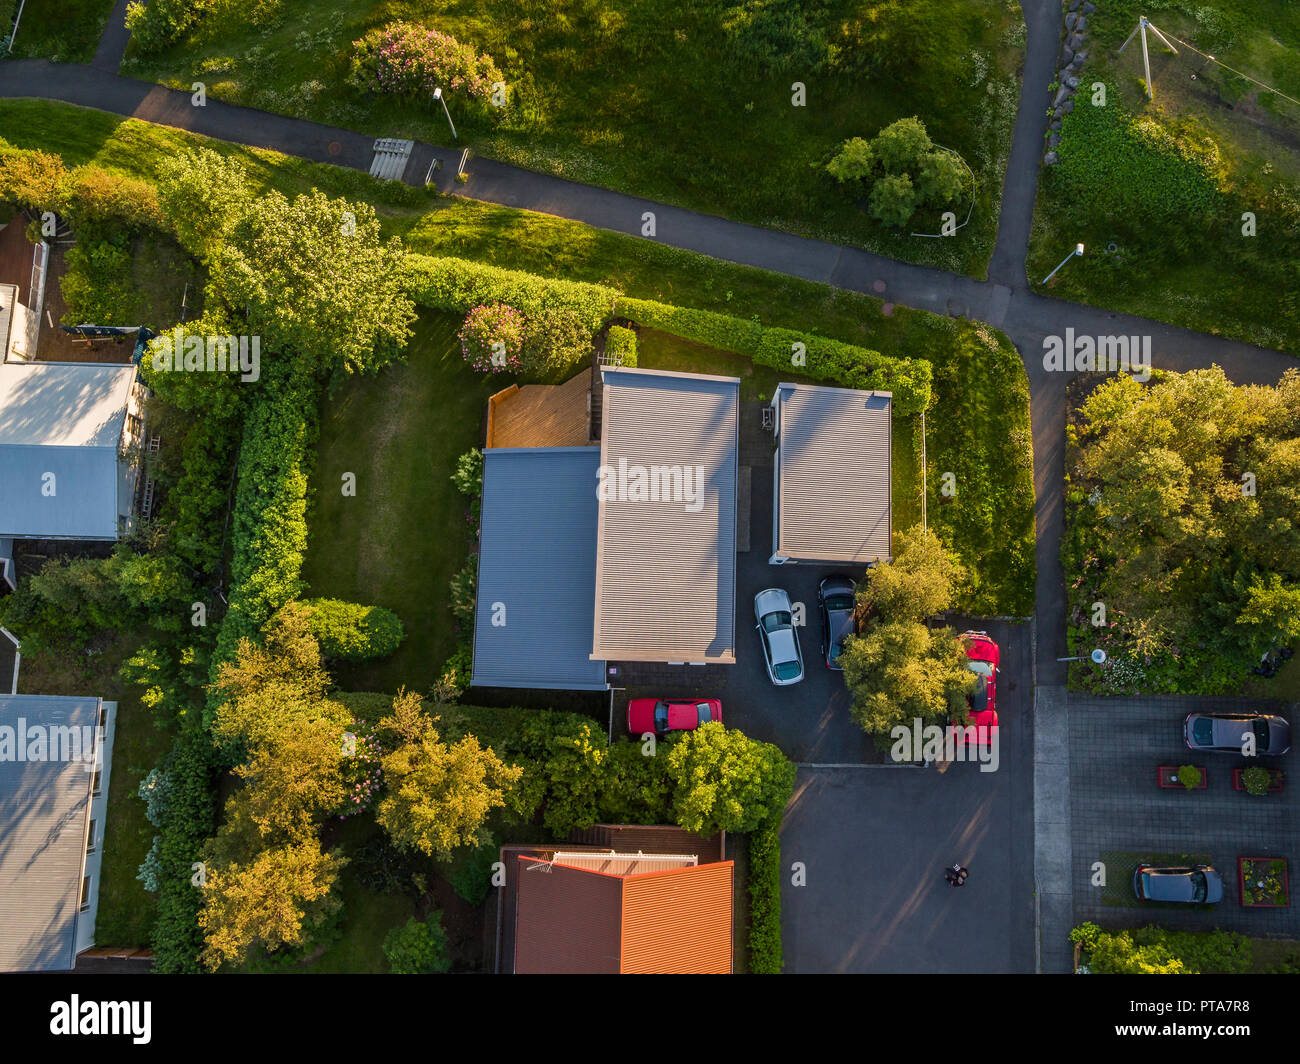 Top view of private homes, Grafarvogur a suburb of Reykjavik, Iceland Stock Photo